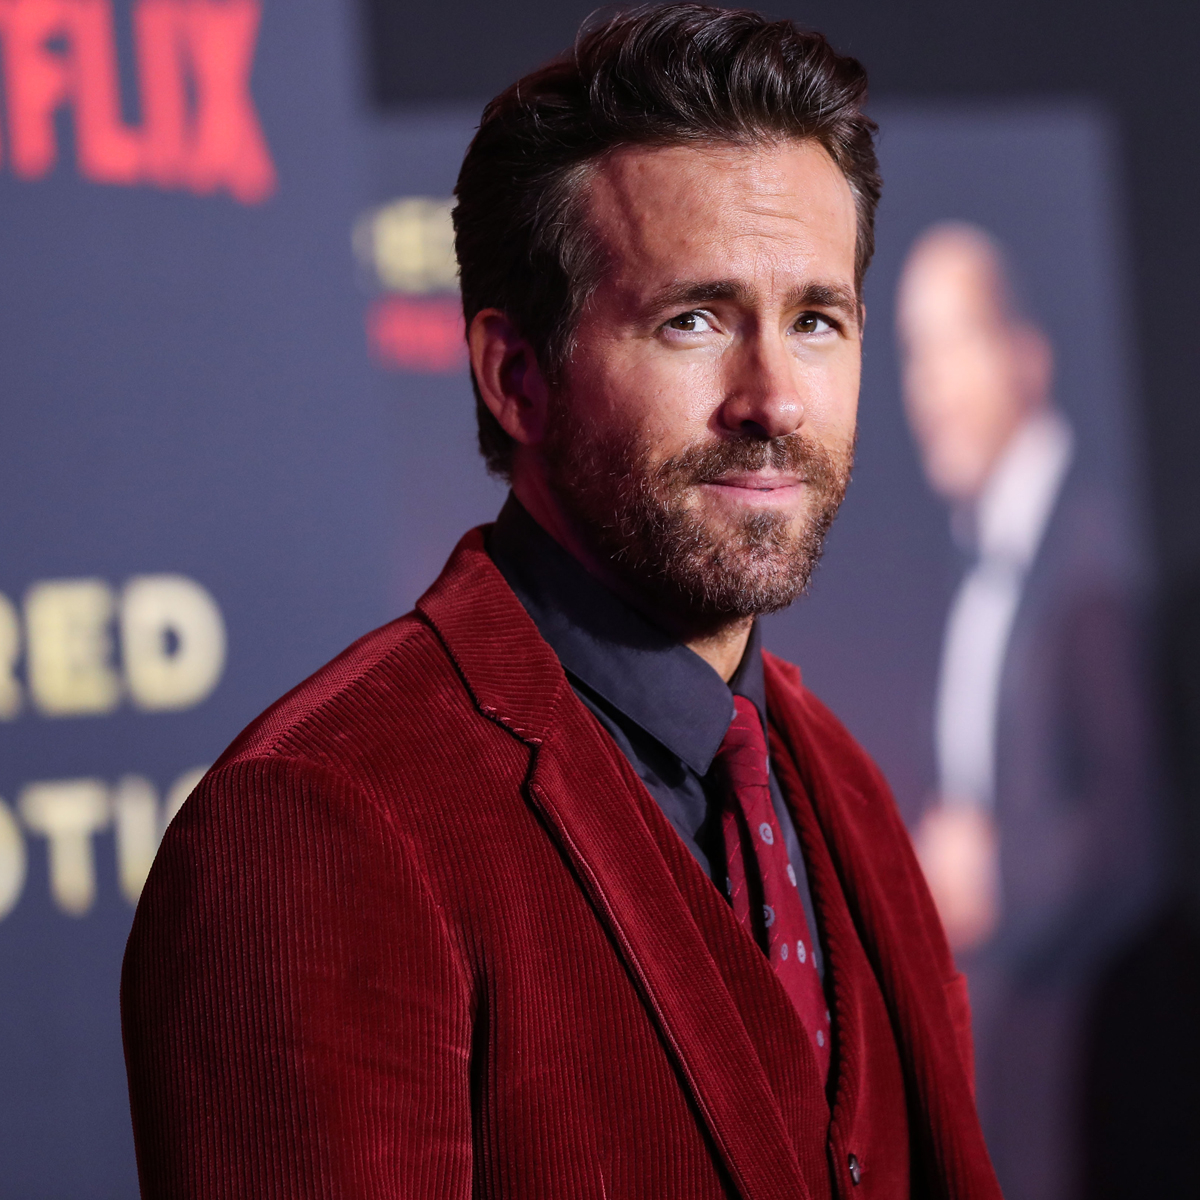 https://akns-images.eonline.com/eol_images/Entire_Site/2022813/rs_1200x1200-220913140254-1200.ryan-reynolds-red-carpet.jpg?fit=around%7C1200:1200&output-quality=90&crop=1200:1200;center,top